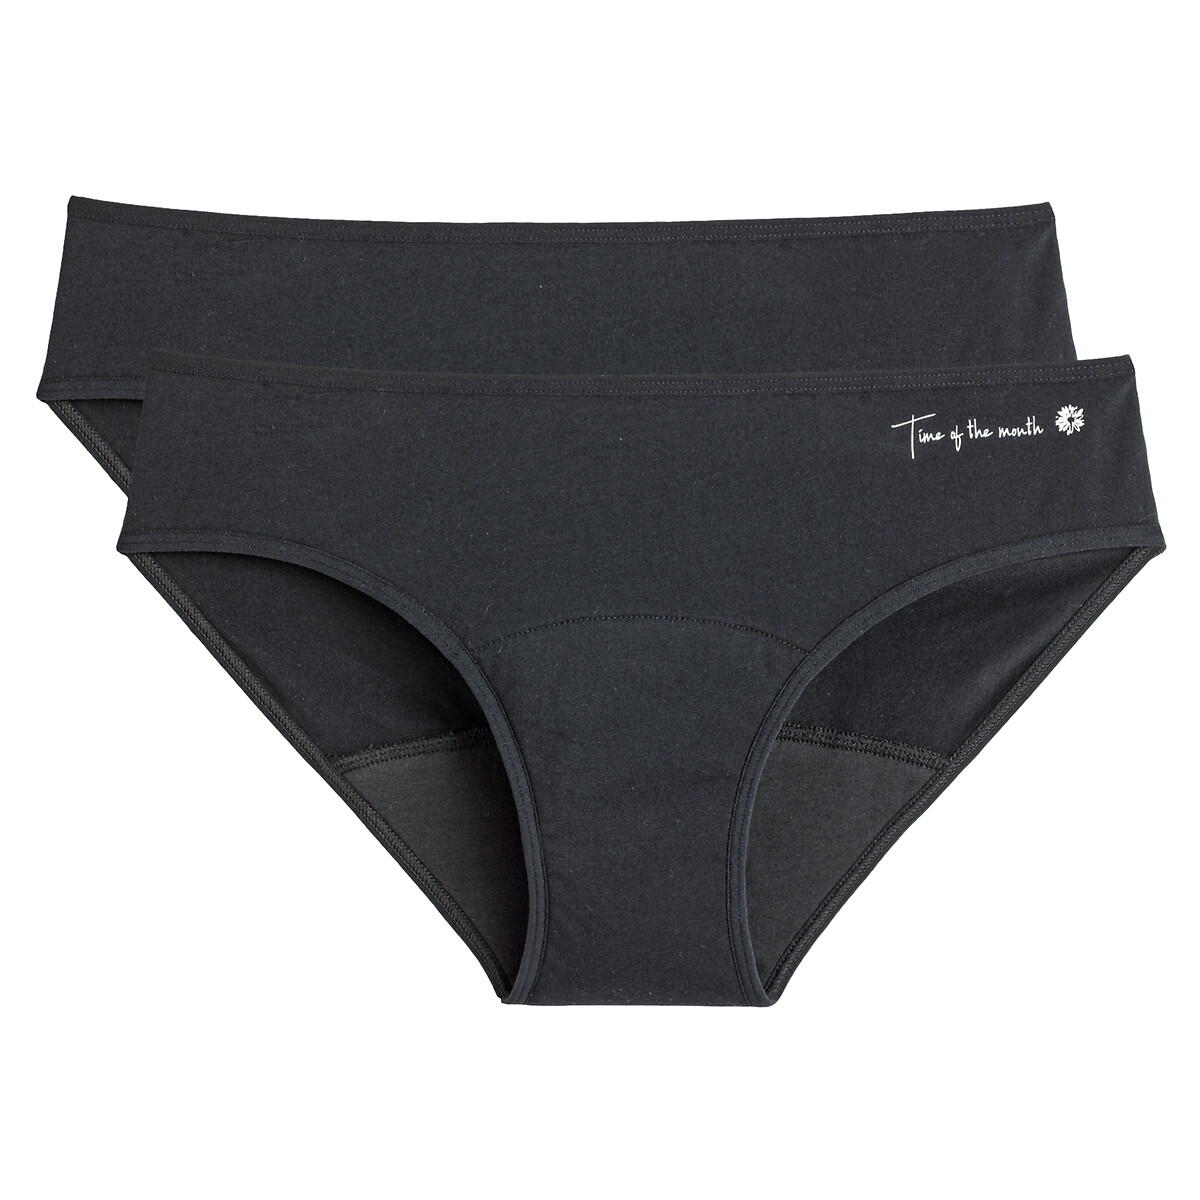 Pack of 2 Period Knickers in Cotton, Medium Flow